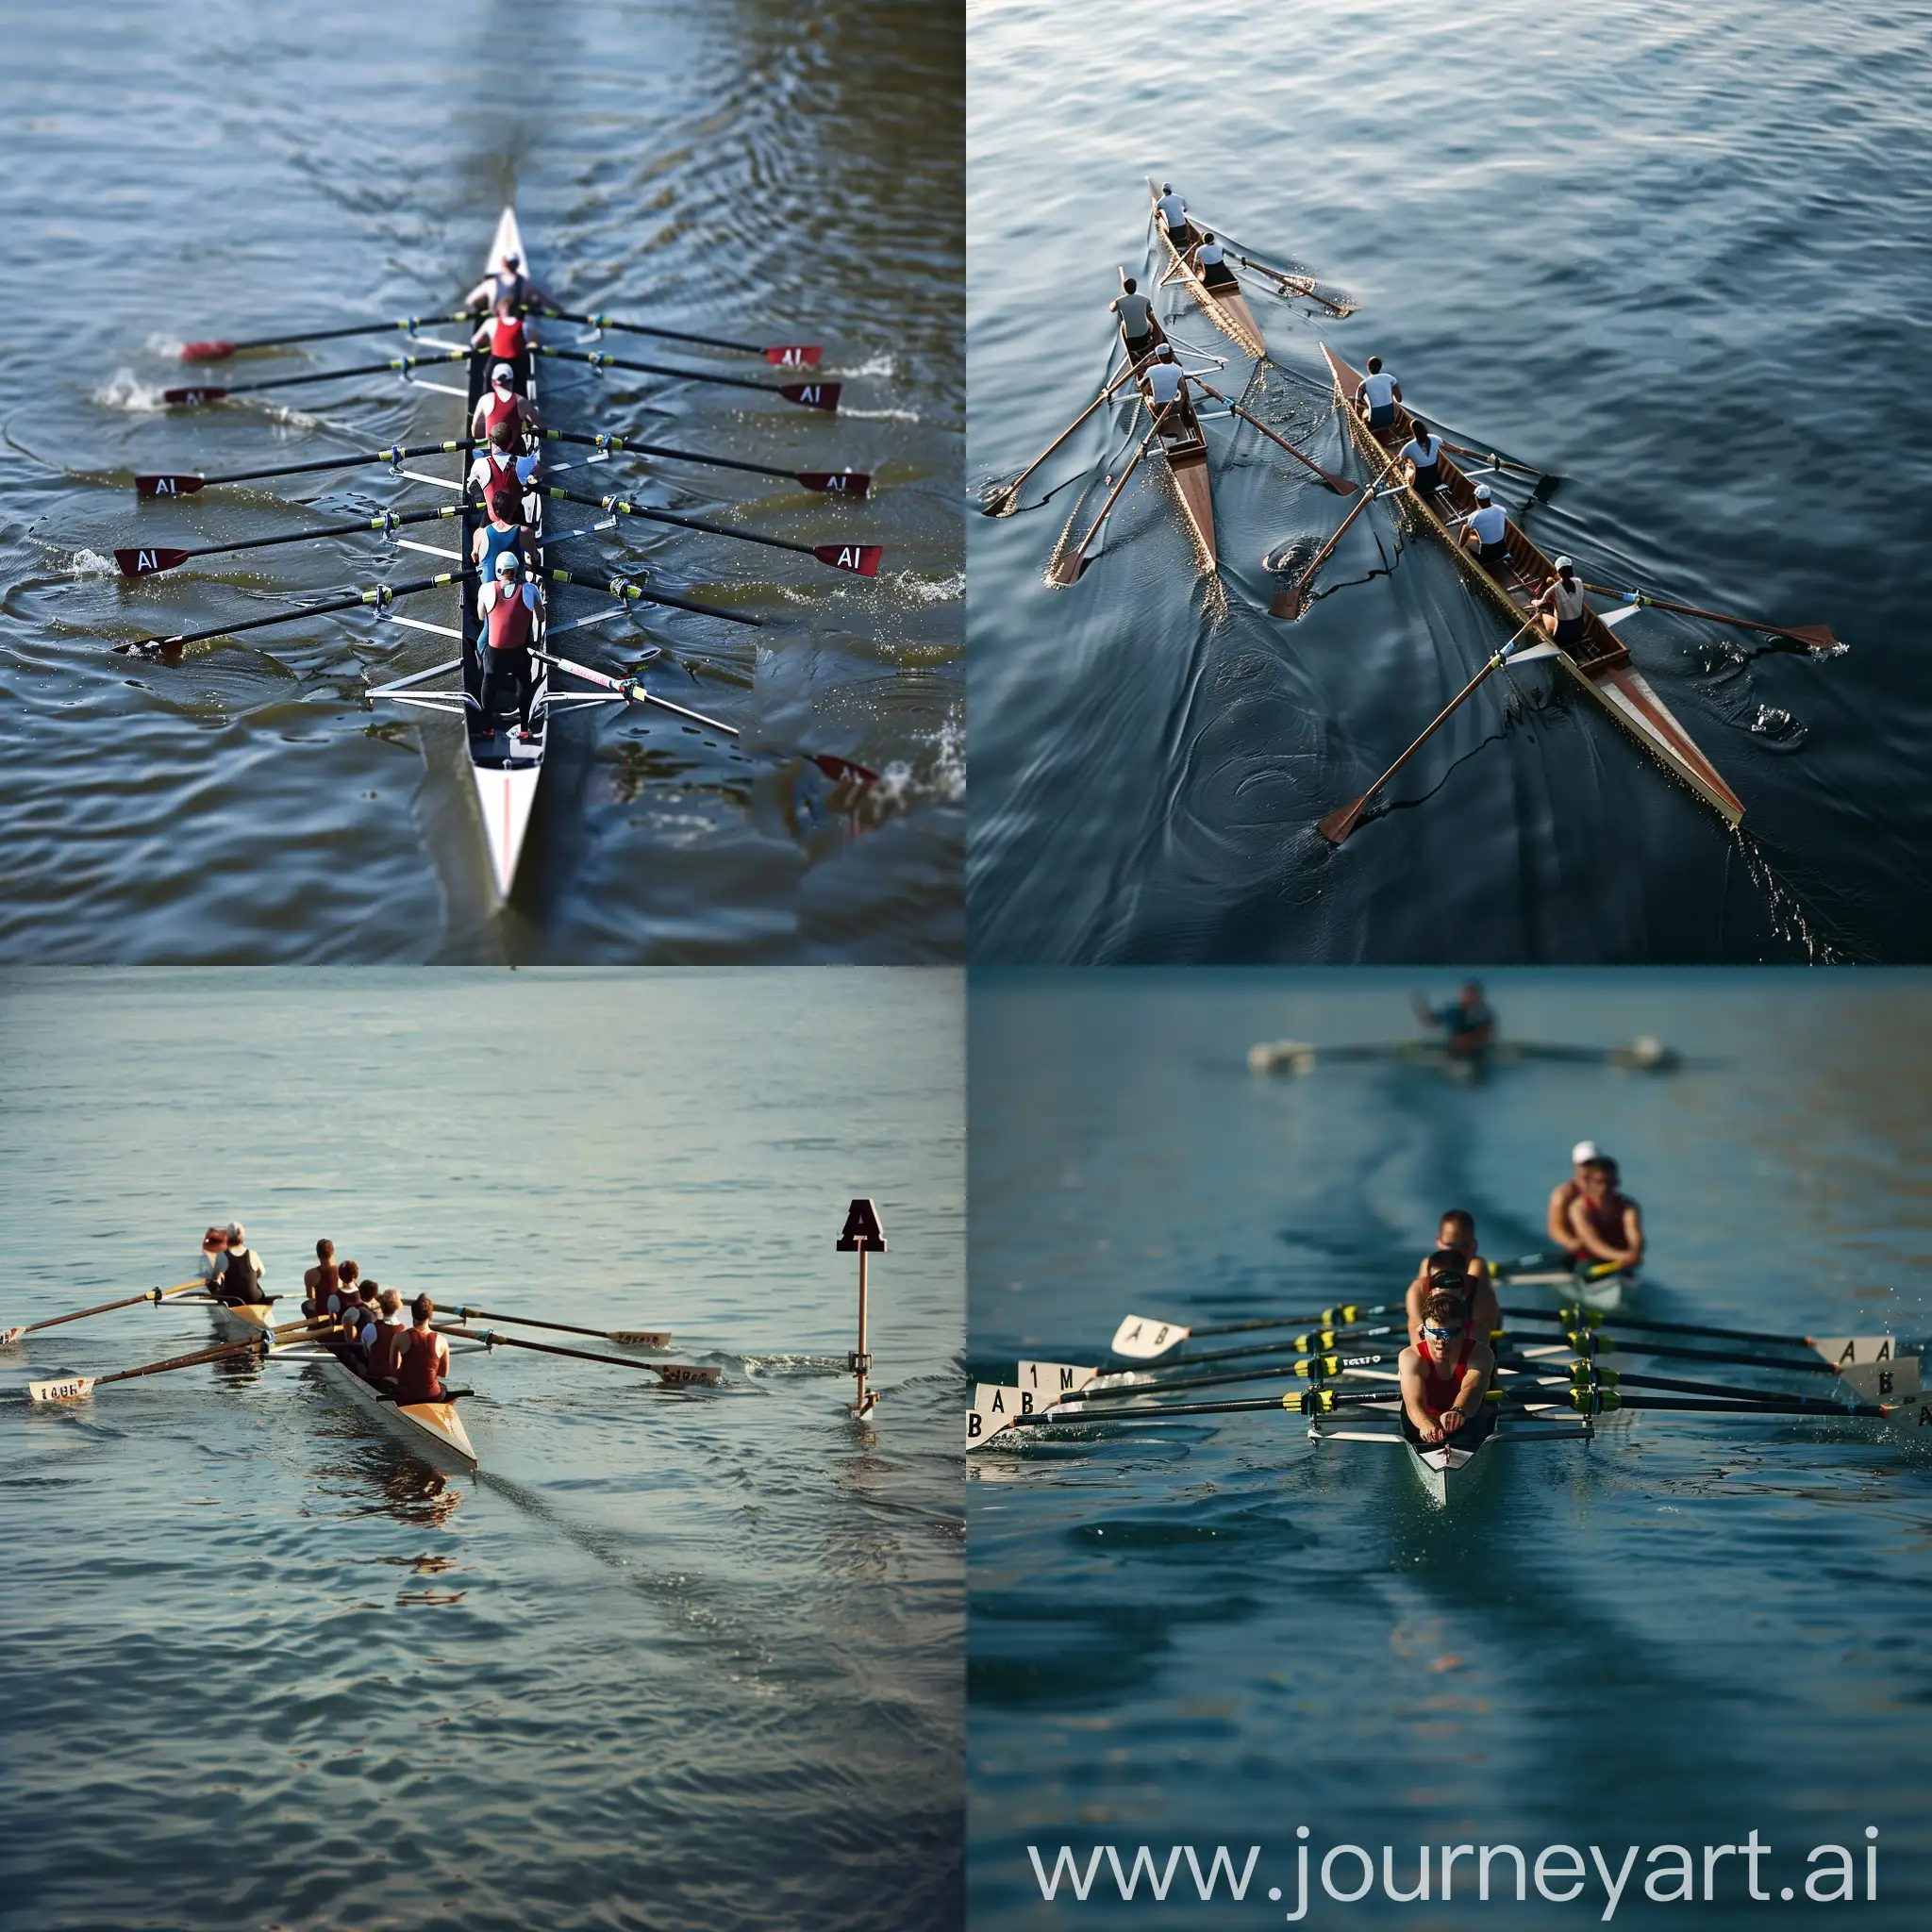 A rowboat competition with three teams:  Team A: All members are actively rowing leading the pack in first place. Team B: Half of the members are rowing, putting them in second place. Team C: Only one member is rowing, far away from the other teams, in third place. Additional Details:  The teams are very different, highlighting the different strategies and the distance between them